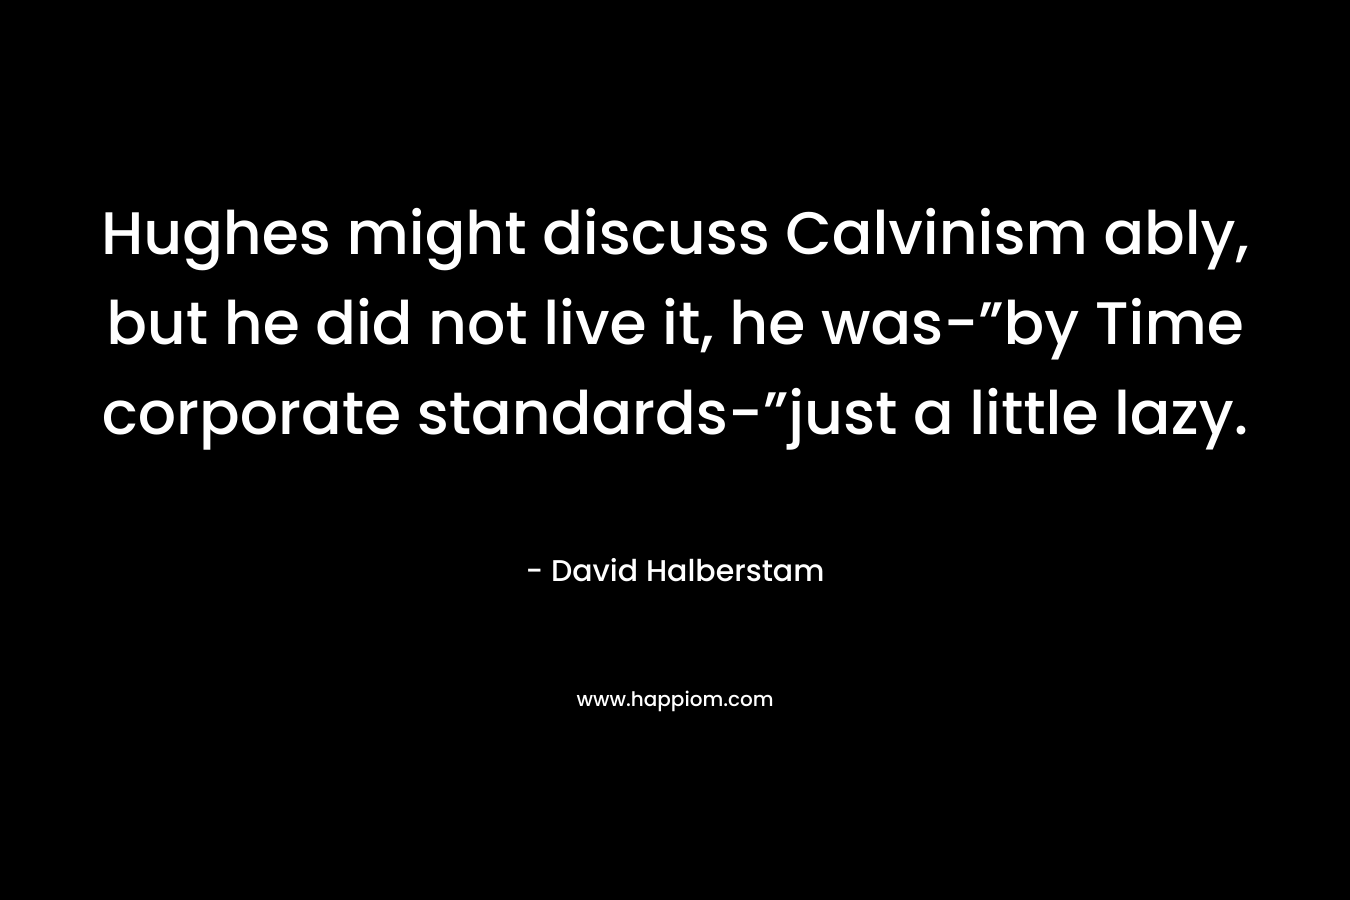 Hughes might discuss Calvinism ably, but he did not live it, he was-”by Time corporate standards-”just a little lazy.